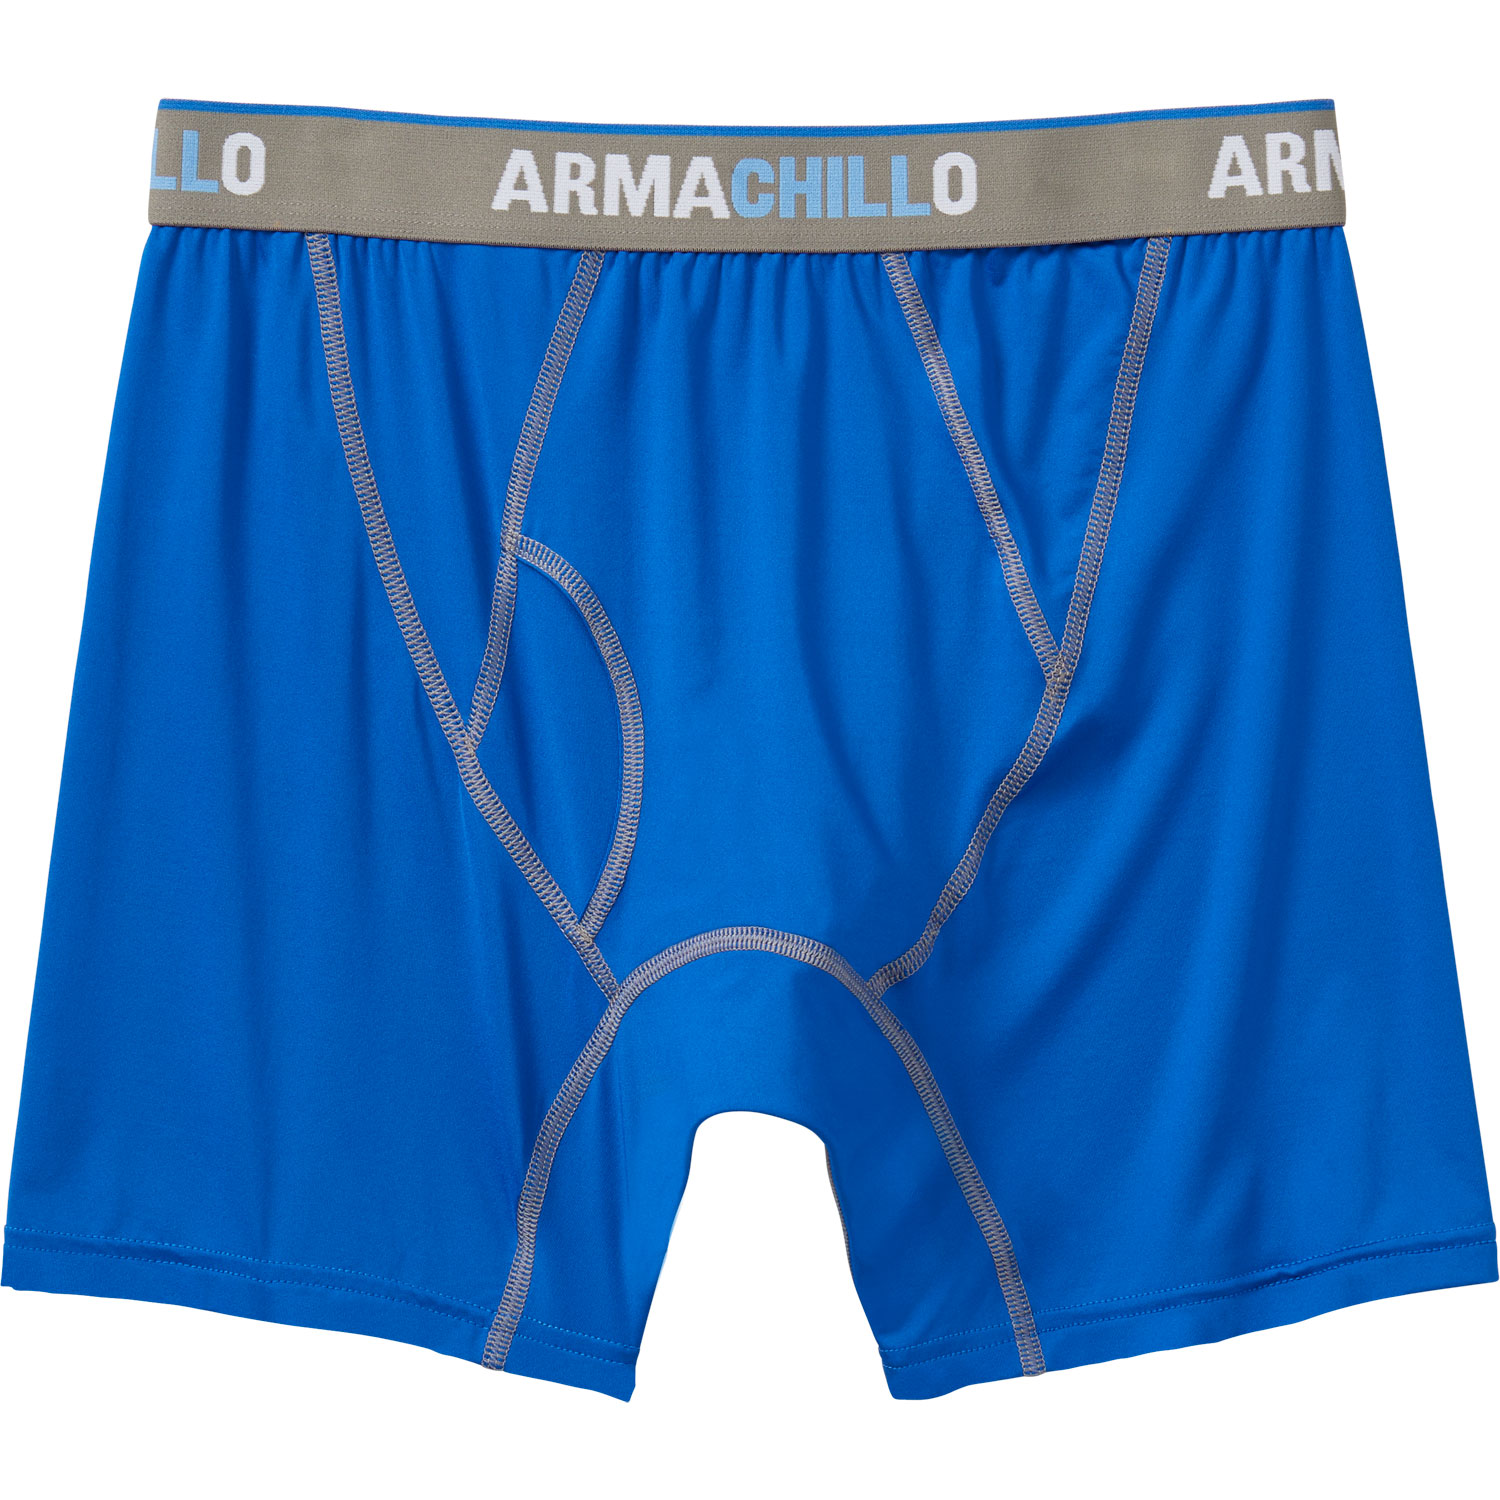 Men's Armachillo Cooling Boxer Brief Underwear - Duluth Trading Company